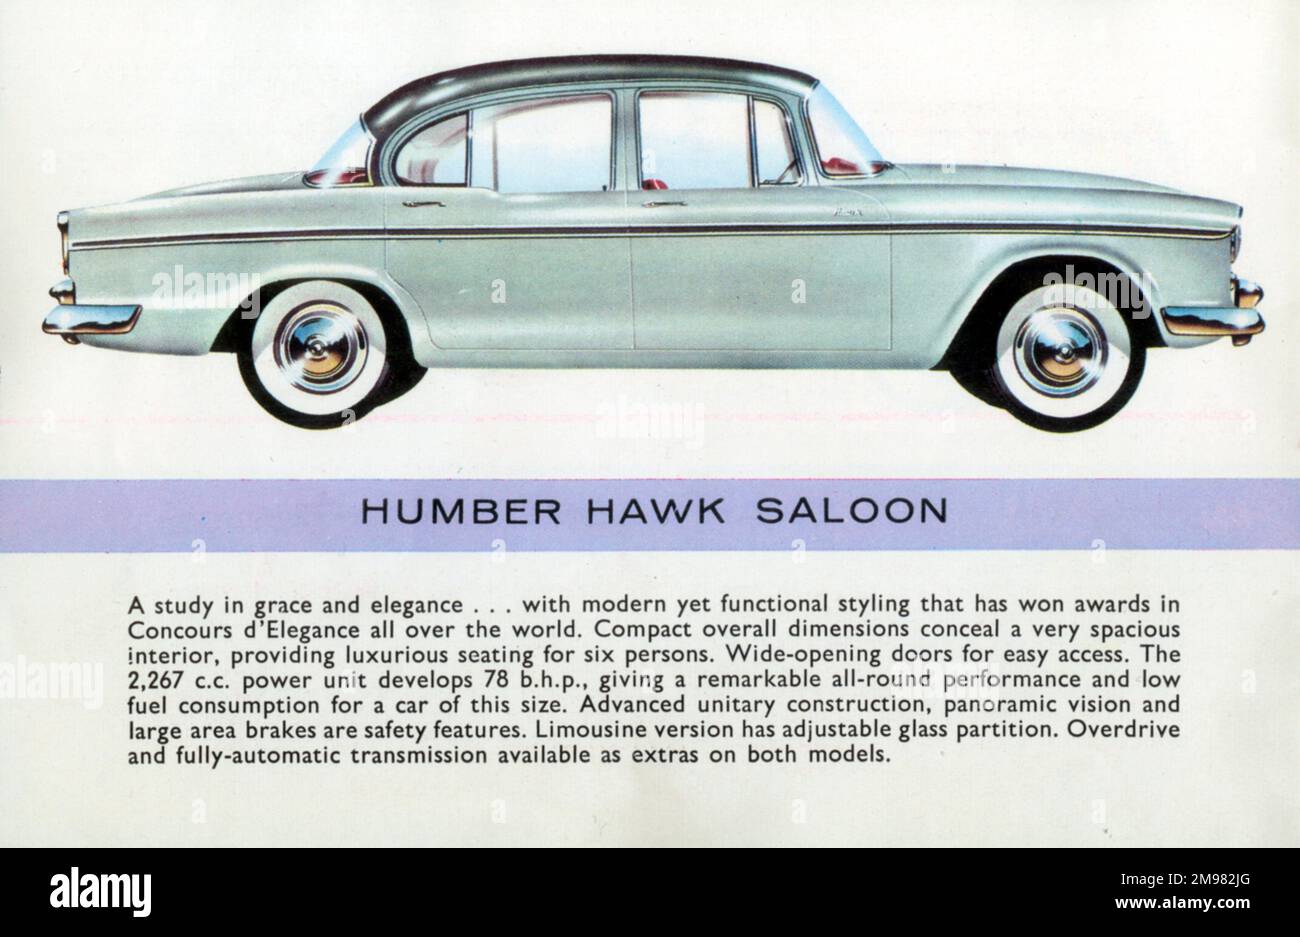 The Humber Hawk Saloon in a Humber, Hillman and Sunbeam Rootes Motors Limited brochure Stock Photo